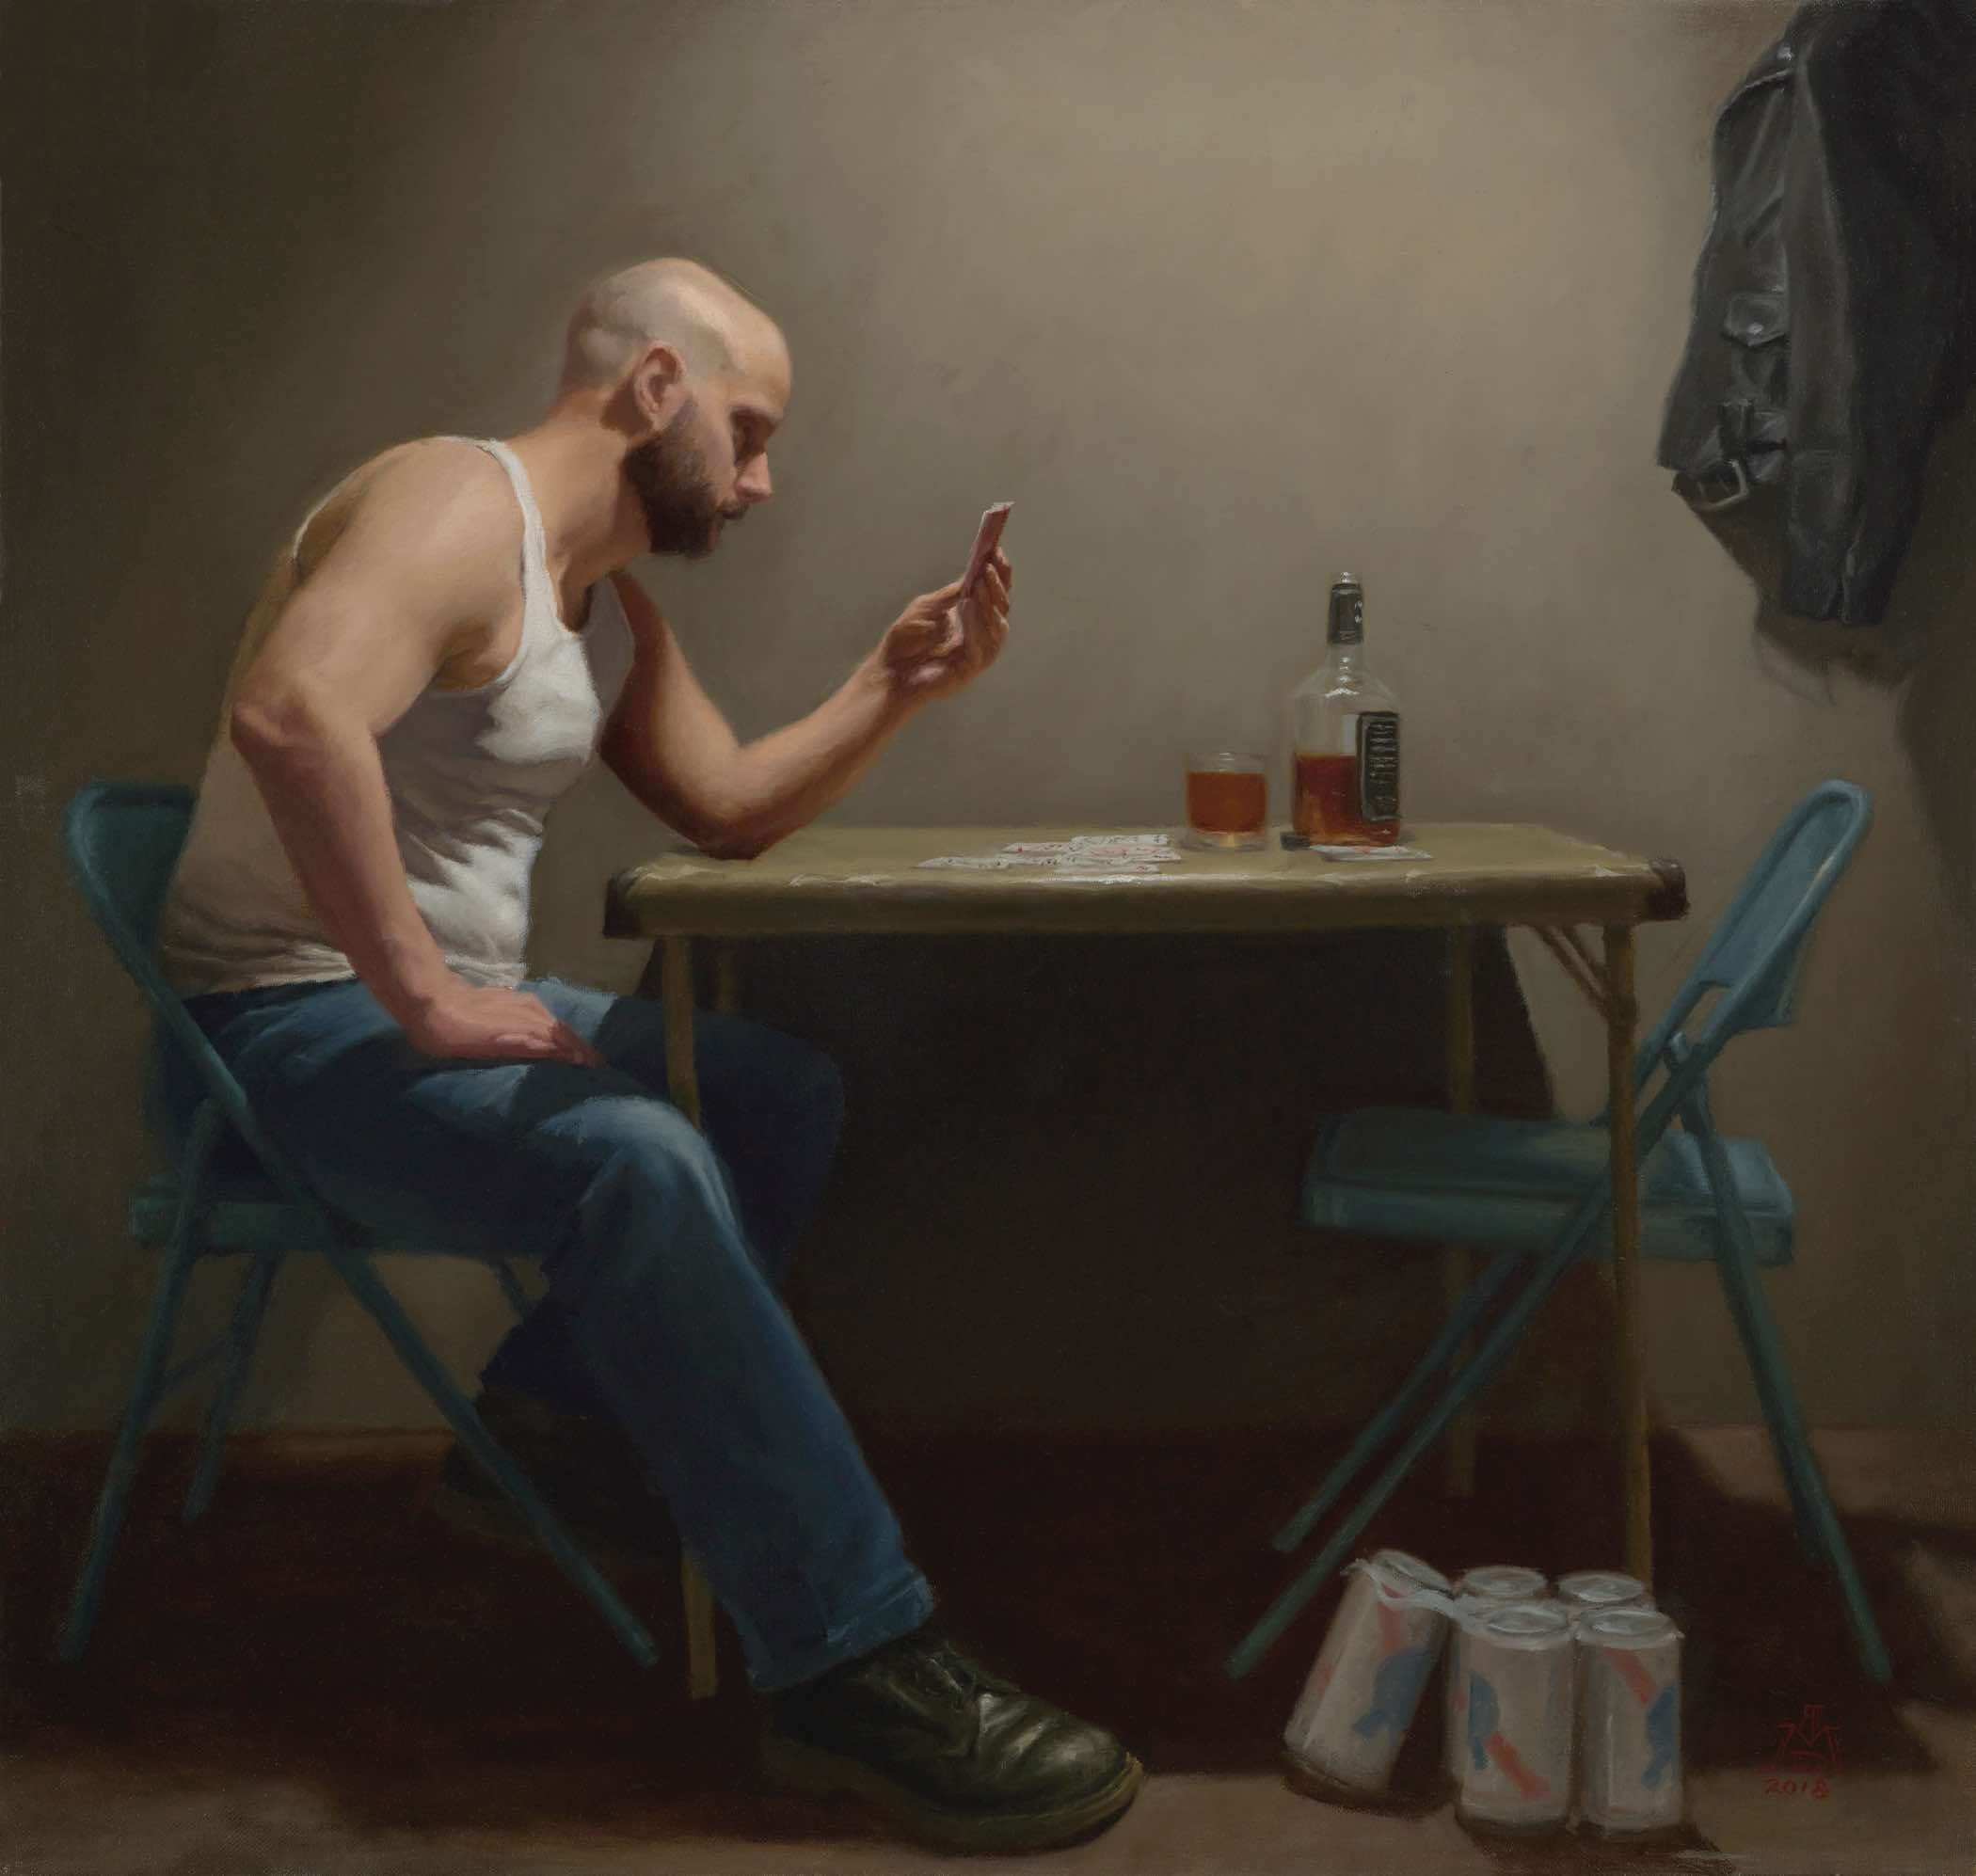 Marc Duquette’s painting “Cheating at Solitaire” was recently juried into the Figuratively Speaking exhibition at the Salmagundi Club in New York City.